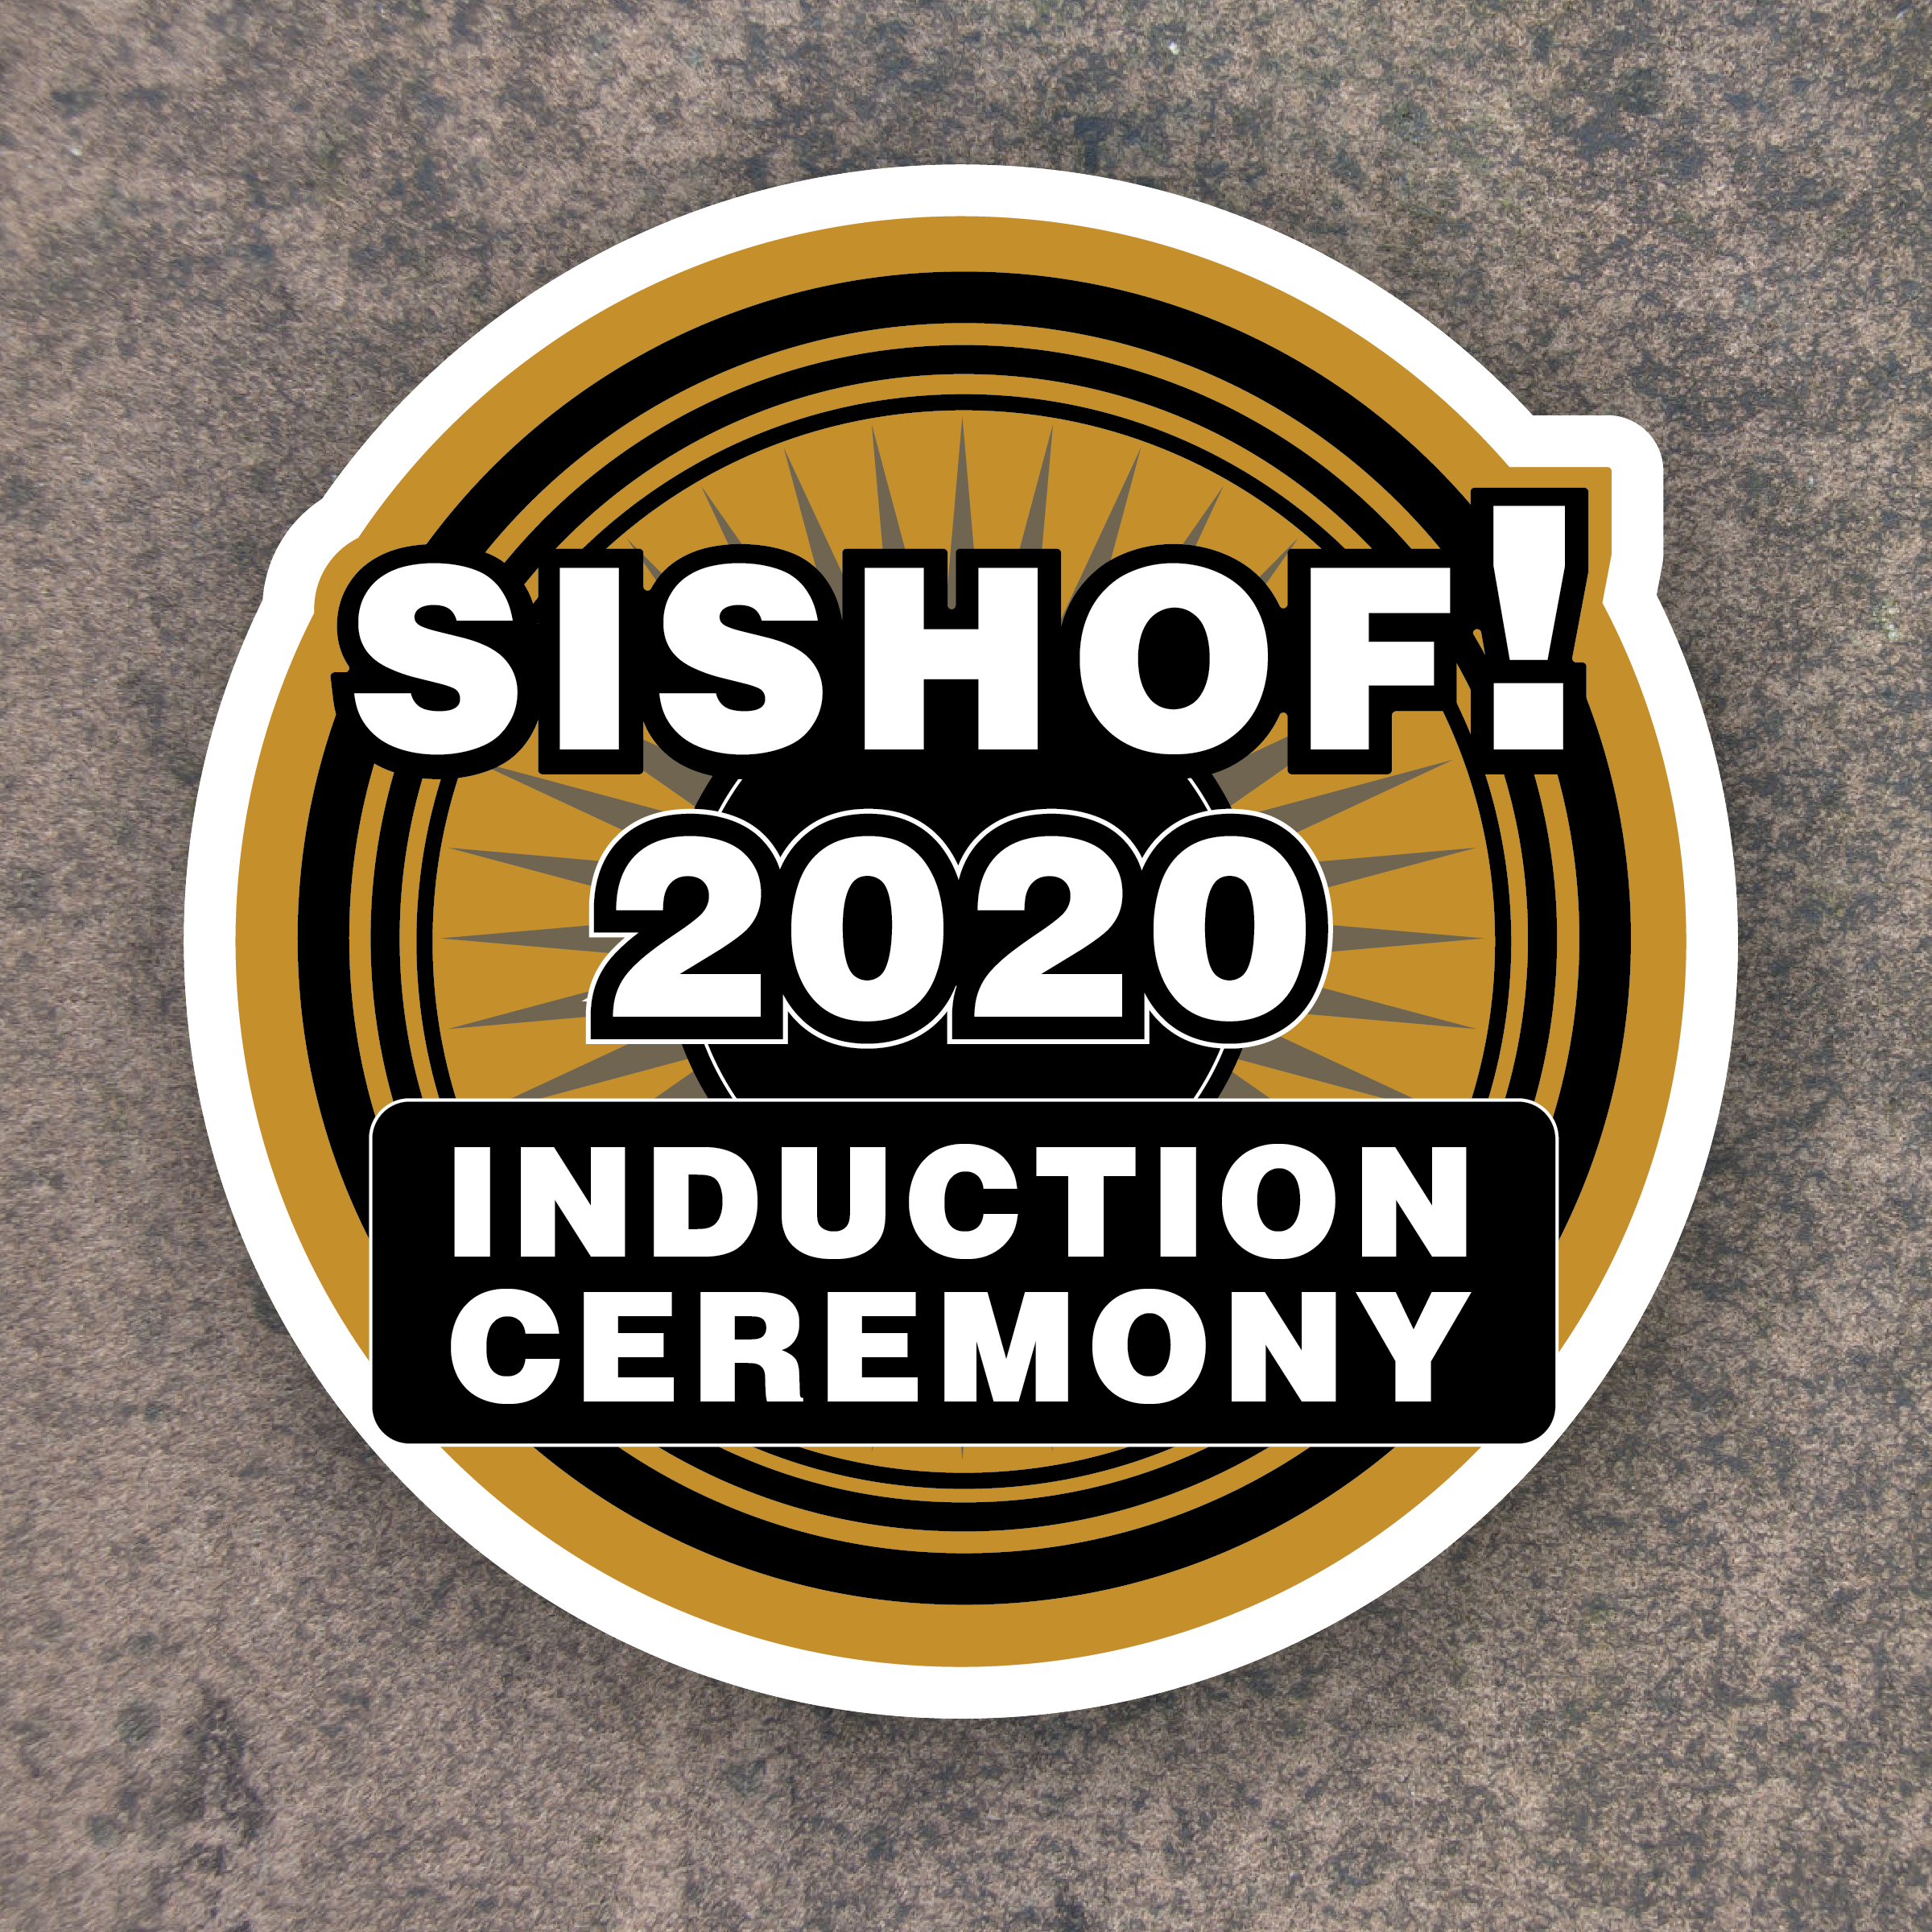 Staten Island Sports Hall of Fame 2020 Induction Ceremony Logo